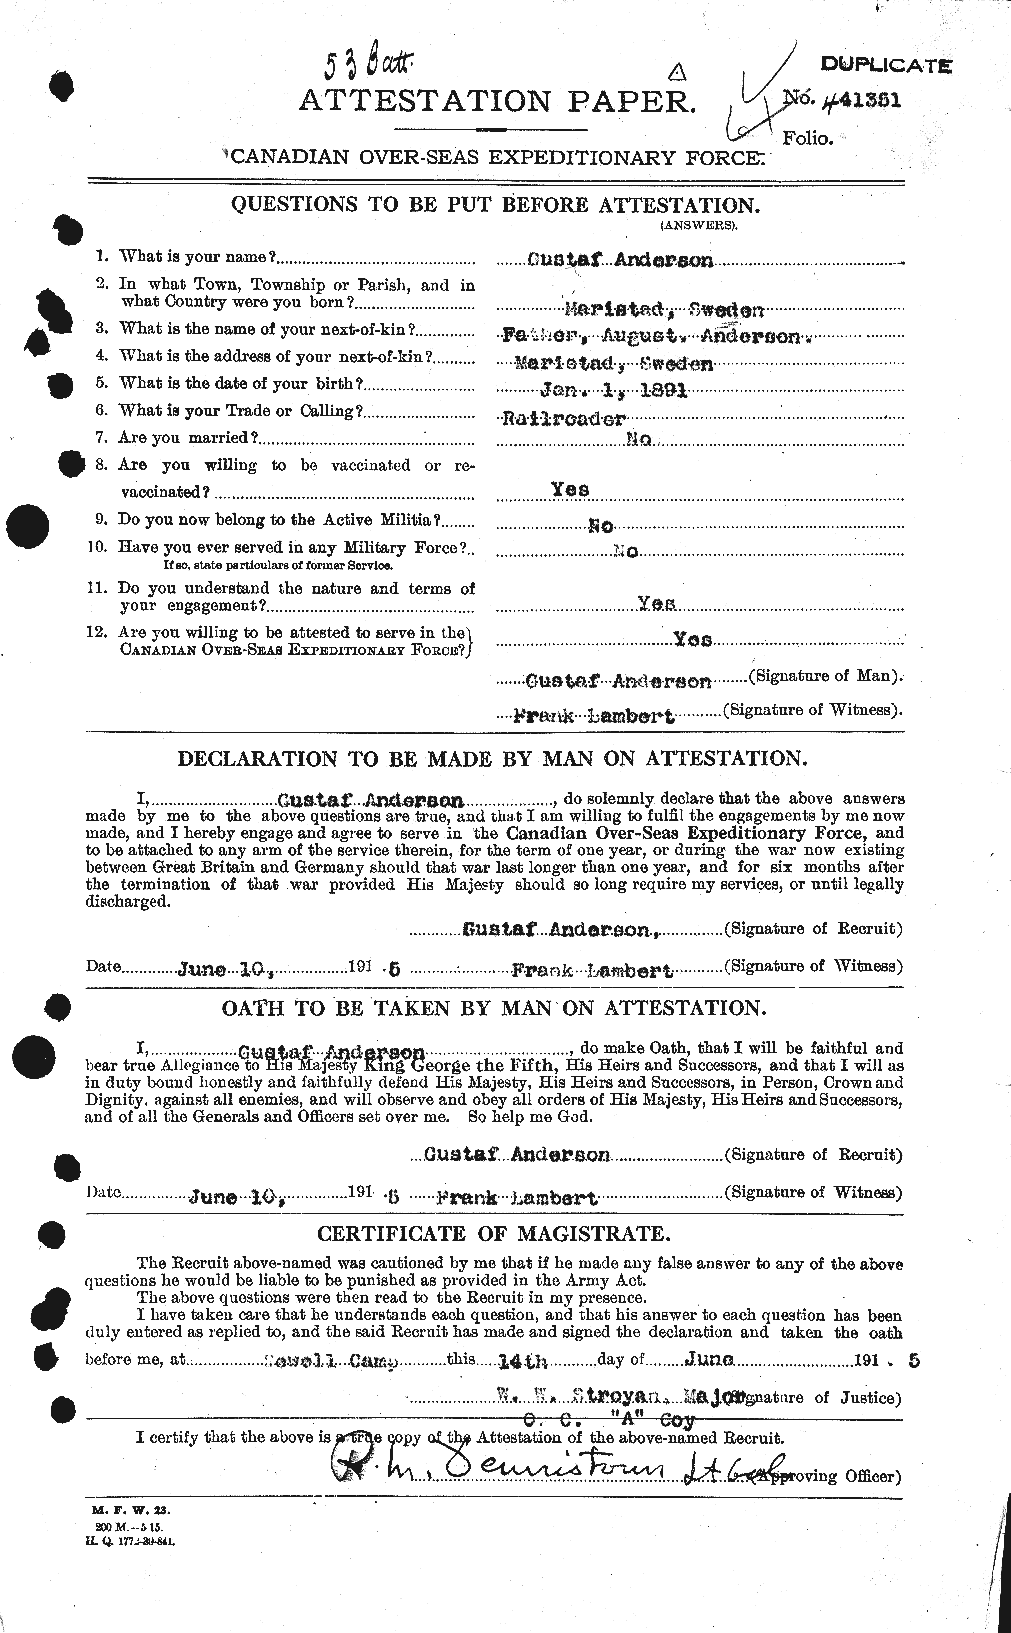 Personnel Records of the First World War - CEF 209649a